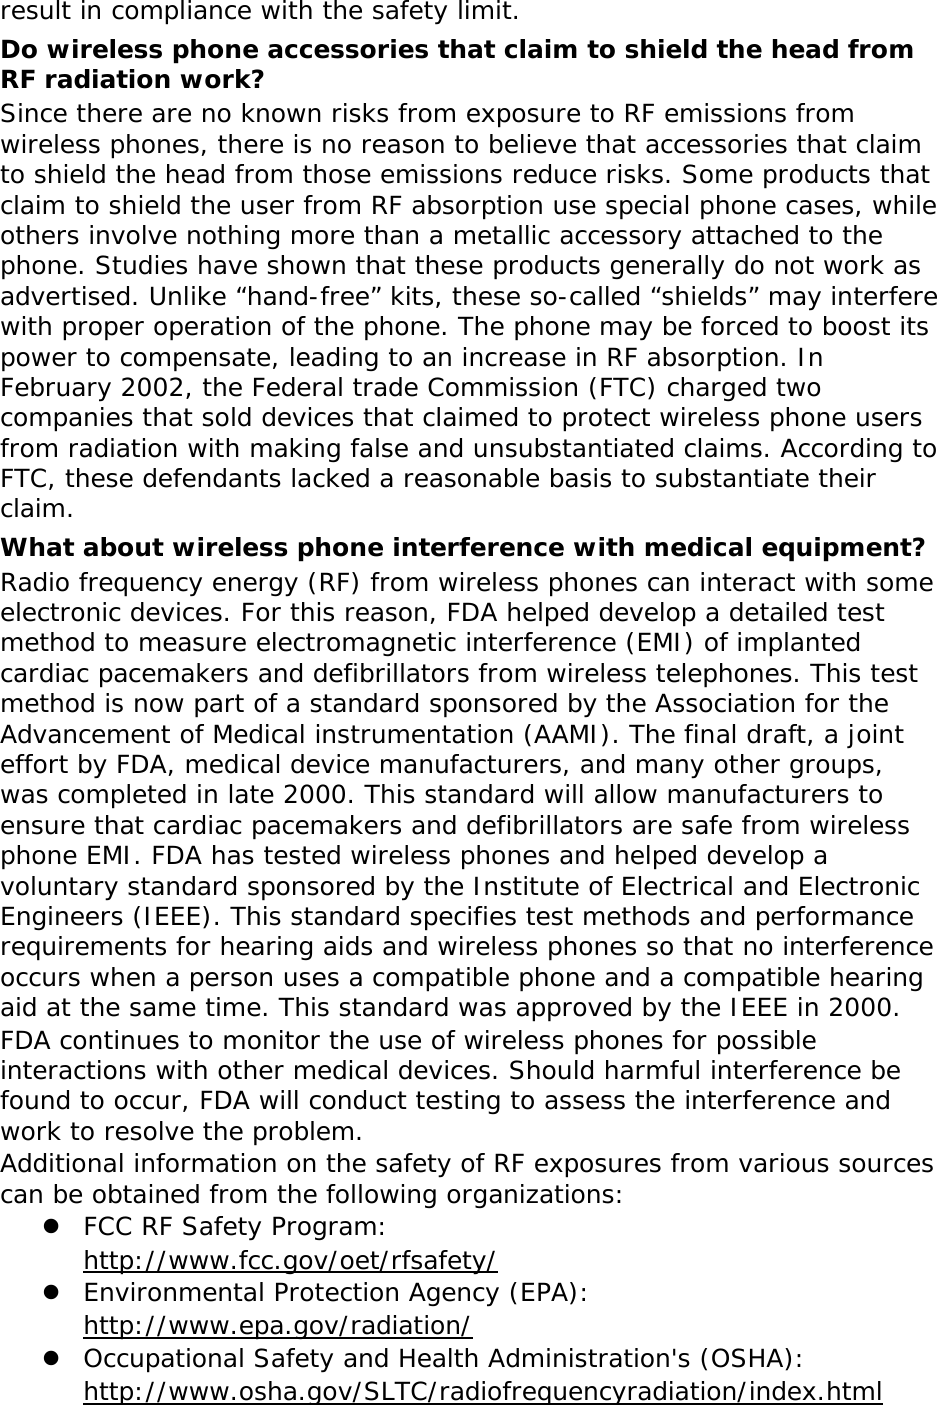 result in compliance with the safety limit. Do wireless phone accessories that claim to shield the head from RF radiation work? Since there are no known risks from exposure to RF emissions from wireless phones, there is no reason to believe that accessories that claim to shield the head from those emissions reduce risks. Some products that claim to shield the user from RF absorption use special phone cases, while others involve nothing more than a metallic accessory attached to the phone. Studies have shown that these products generally do not work as advertised. Unlike “hand-free” kits, these so-called “shields” may interfere with proper operation of the phone. The phone may be forced to boost its power to compensate, leading to an increase in RF absorption. In February 2002, the Federal trade Commission (FTC) charged two companies that sold devices that claimed to protect wireless phone users from radiation with making false and unsubstantiated claims. According to FTC, these defendants lacked a reasonable basis to substantiate their claim. What about wireless phone interference with medical equipment? Radio frequency energy (RF) from wireless phones can interact with some electronic devices. For this reason, FDA helped develop a detailed test method to measure electromagnetic interference (EMI) of implanted cardiac pacemakers and defibrillators from wireless telephones. This test method is now part of a standard sponsored by the Association for the Advancement of Medical instrumentation (AAMI). The final draft, a joint effort by FDA, medical device manufacturers, and many other groups, was completed in late 2000. This standard will allow manufacturers to ensure that cardiac pacemakers and defibrillators are safe from wireless phone EMI. FDA has tested wireless phones and helped develop a voluntary standard sponsored by the Institute of Electrical and Electronic Engineers (IEEE). This standard specifies test methods and performance requirements for hearing aids and wireless phones so that no interference occurs when a person uses a compatible phone and a compatible hearing aid at the same time. This standard was approved by the IEEE in 2000. FDA continues to monitor the use of wireless phones for possible interactions with other medical devices. Should harmful interference be found to occur, FDA will conduct testing to assess the interference and work to resolve the problem. Additional information on the safety of RF exposures from various sources can be obtained from the following organizations:  FCC RF Safety Program:  http://www.fcc.gov/oet/rfsafety/  Environmental Protection Agency (EPA):  http://www.epa.gov/radiation/  Occupational Safety and Health Administration&apos;s (OSHA):       http://www.osha.gov/SLTC/radiofrequencyradiation/index.html 